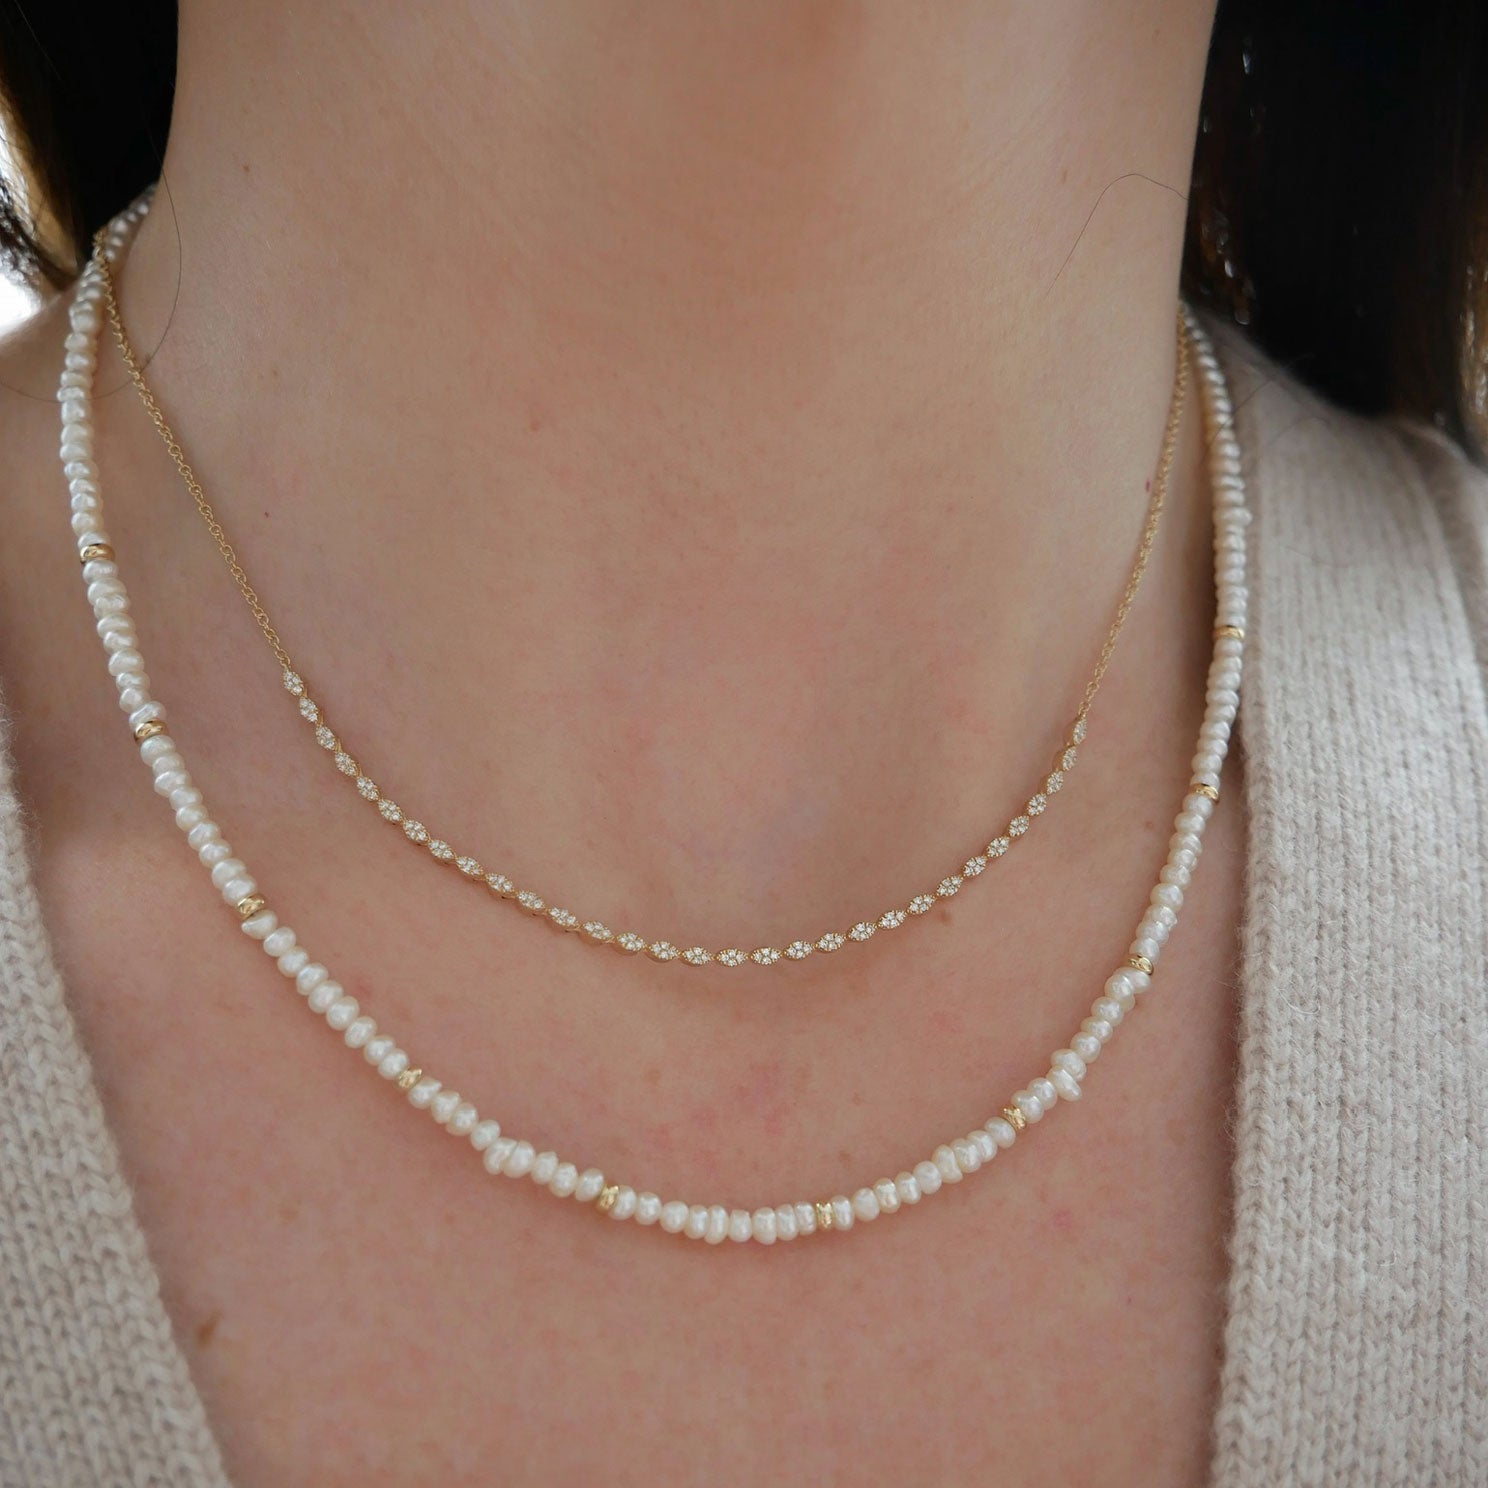 Birthstone Bead Necklace In Pearl styled on neck of model with diamond marquise necklace and wearing tan sweater